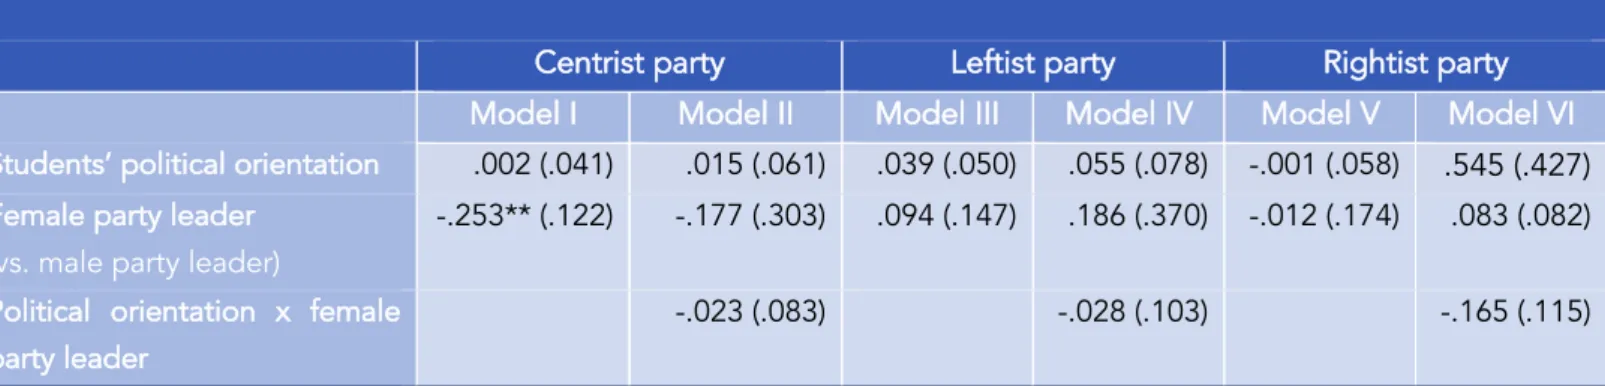 Table 6: Regression model predicting the perceived ideological positioning of centrist, leftist, and rightist parties based on students’ 